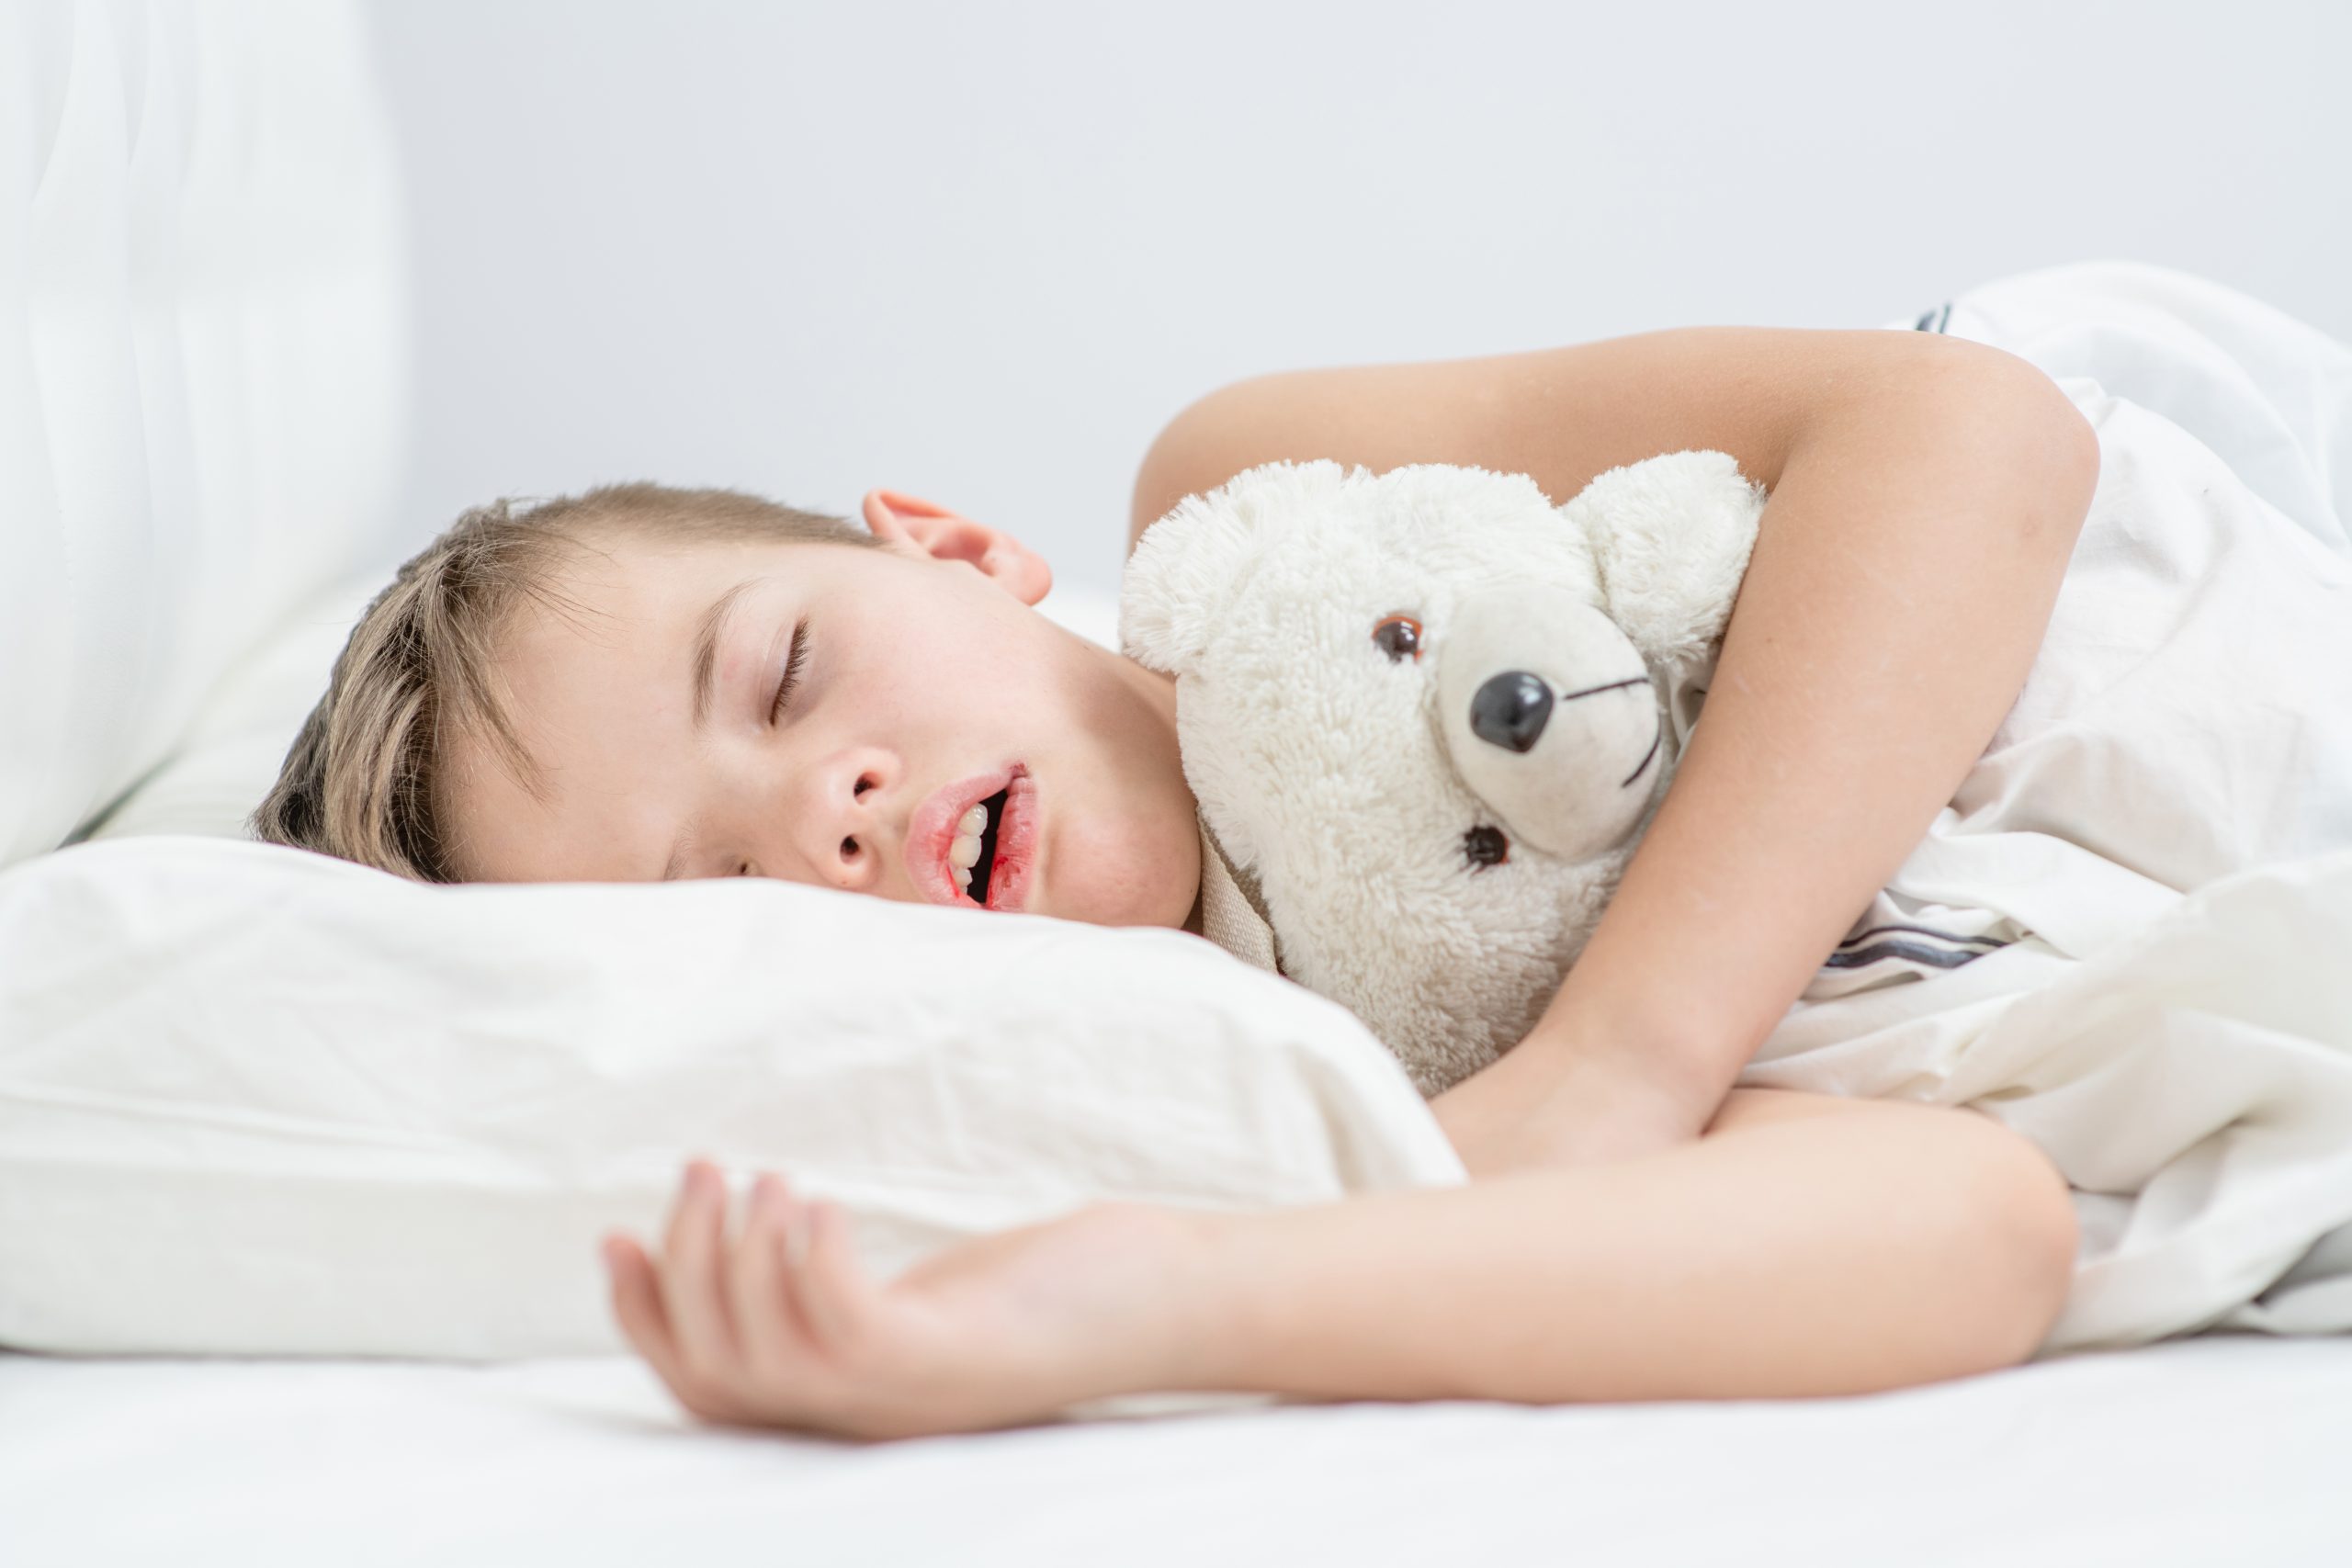 Mouth Breathing in Children: What Should You Do?